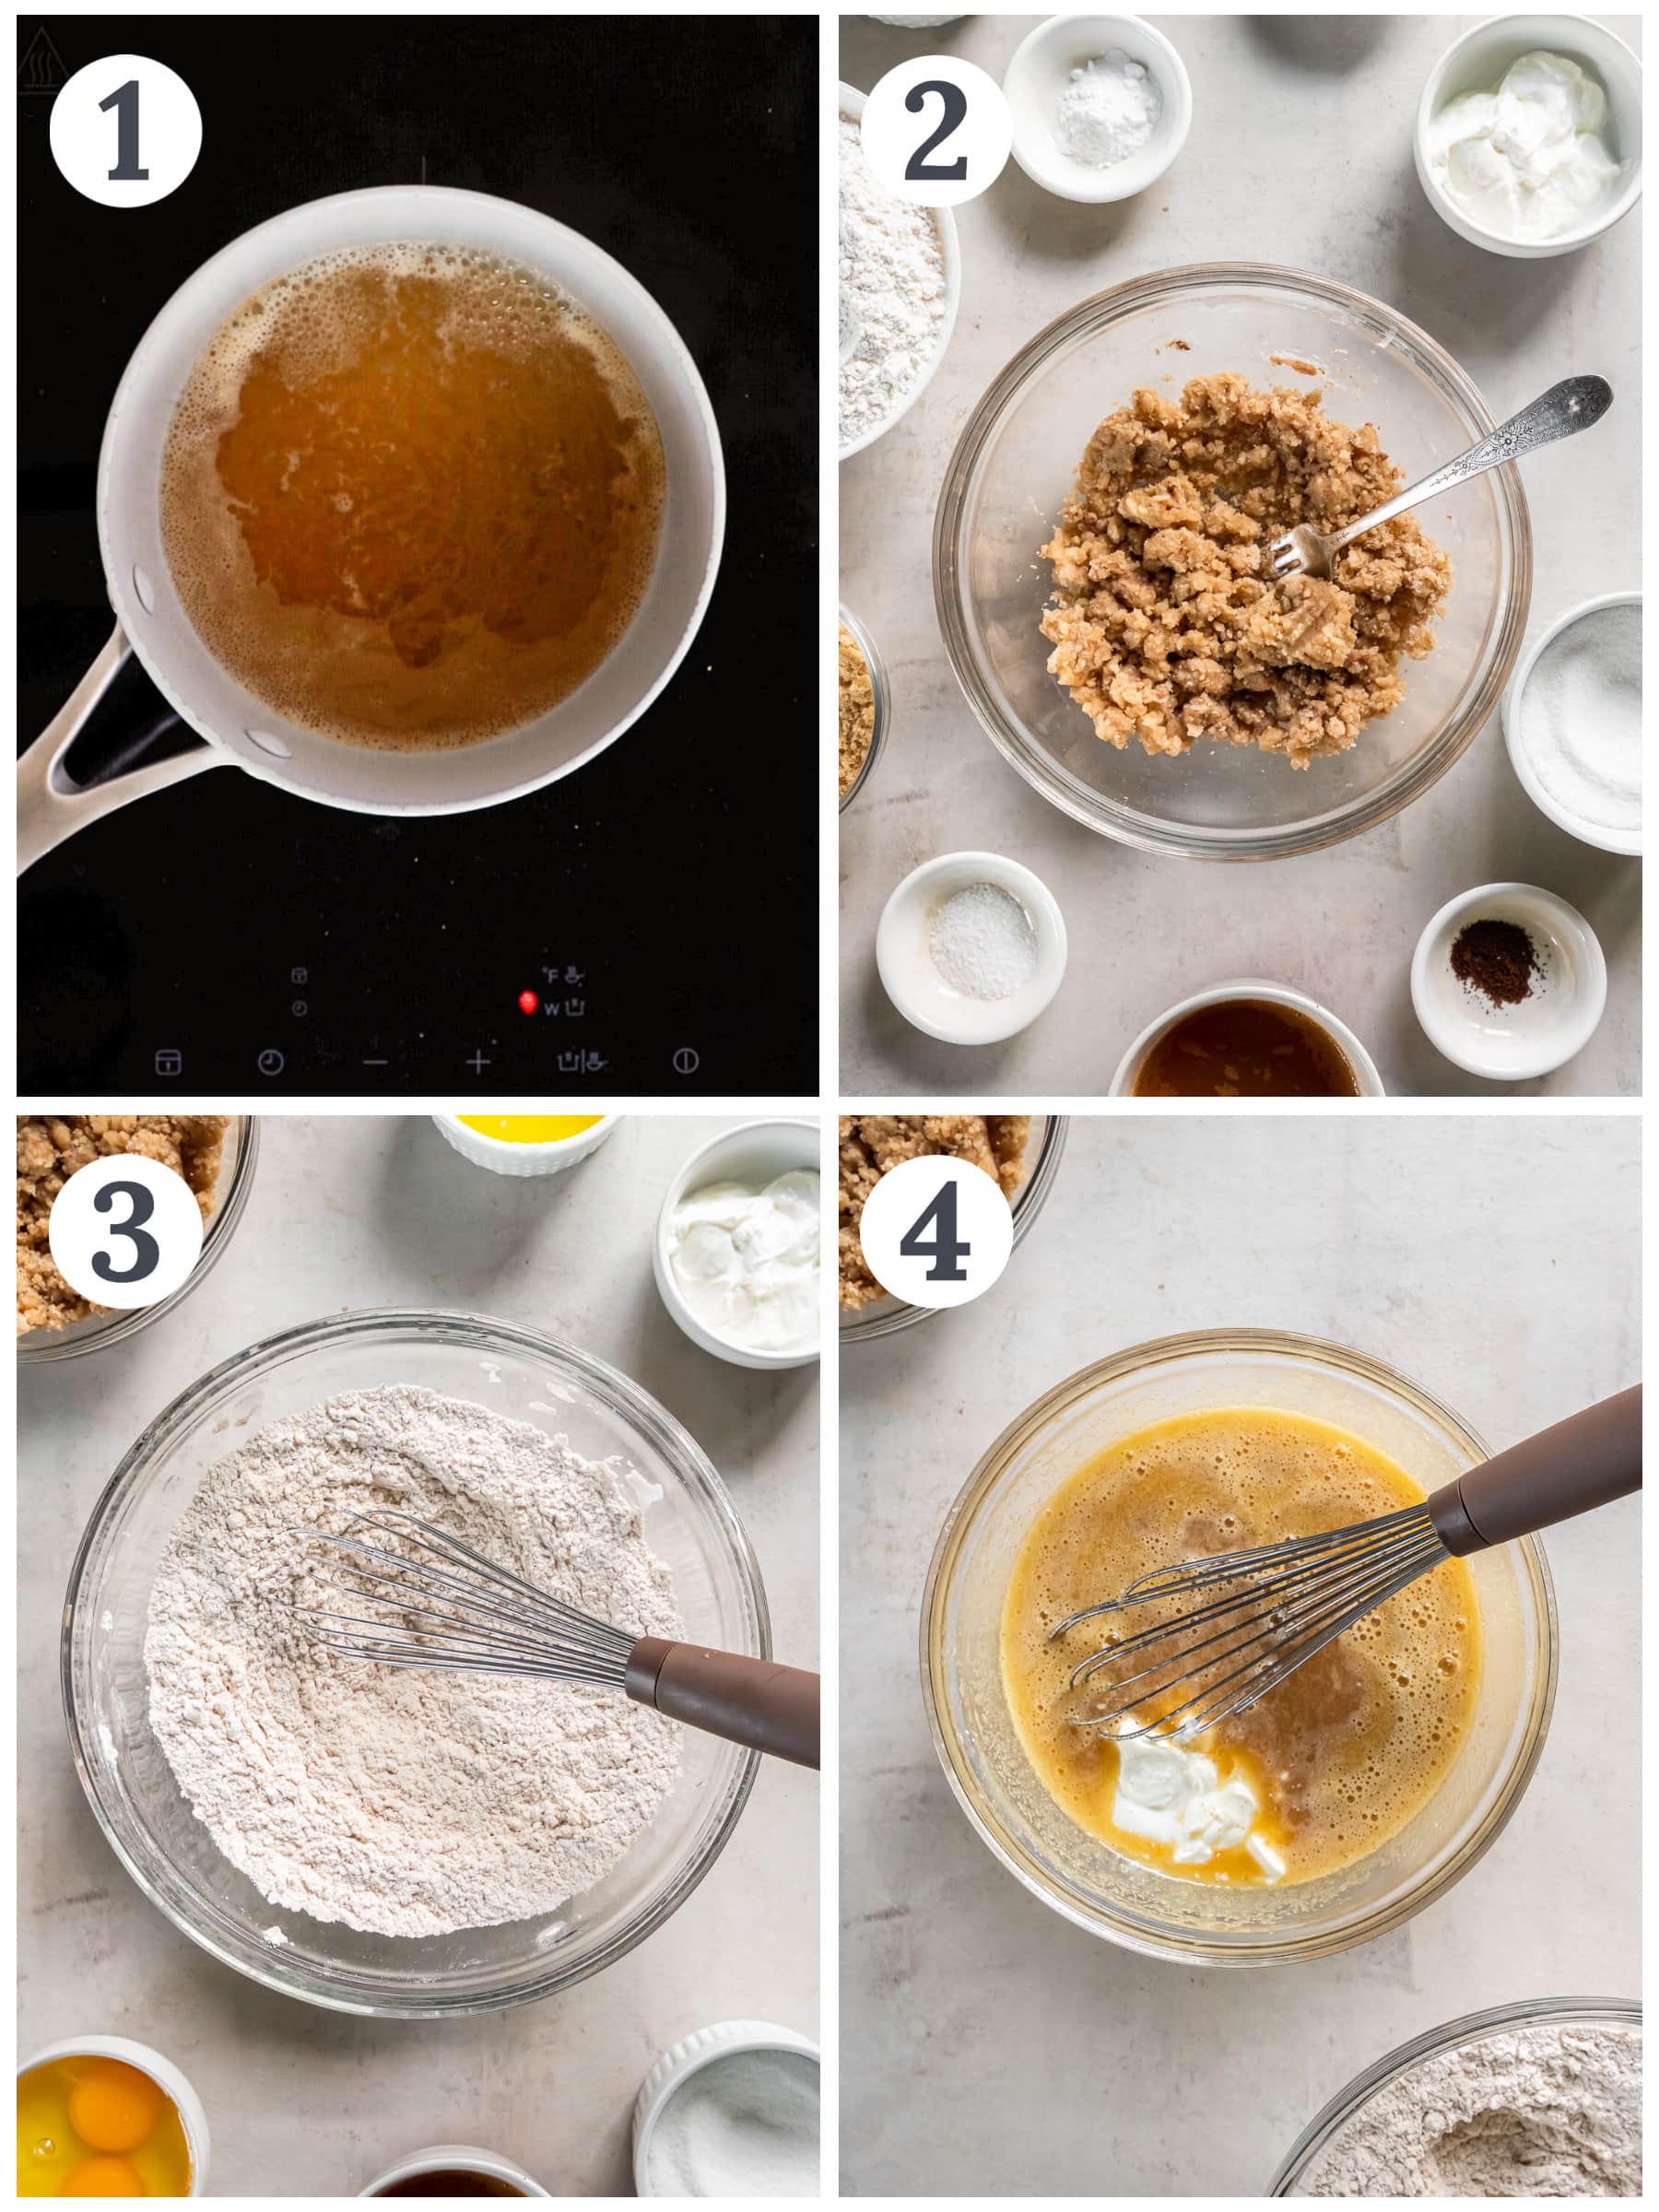 photo collage demonstrating how to make apple cider reduction on stovetop and make batter in mixing bowls.